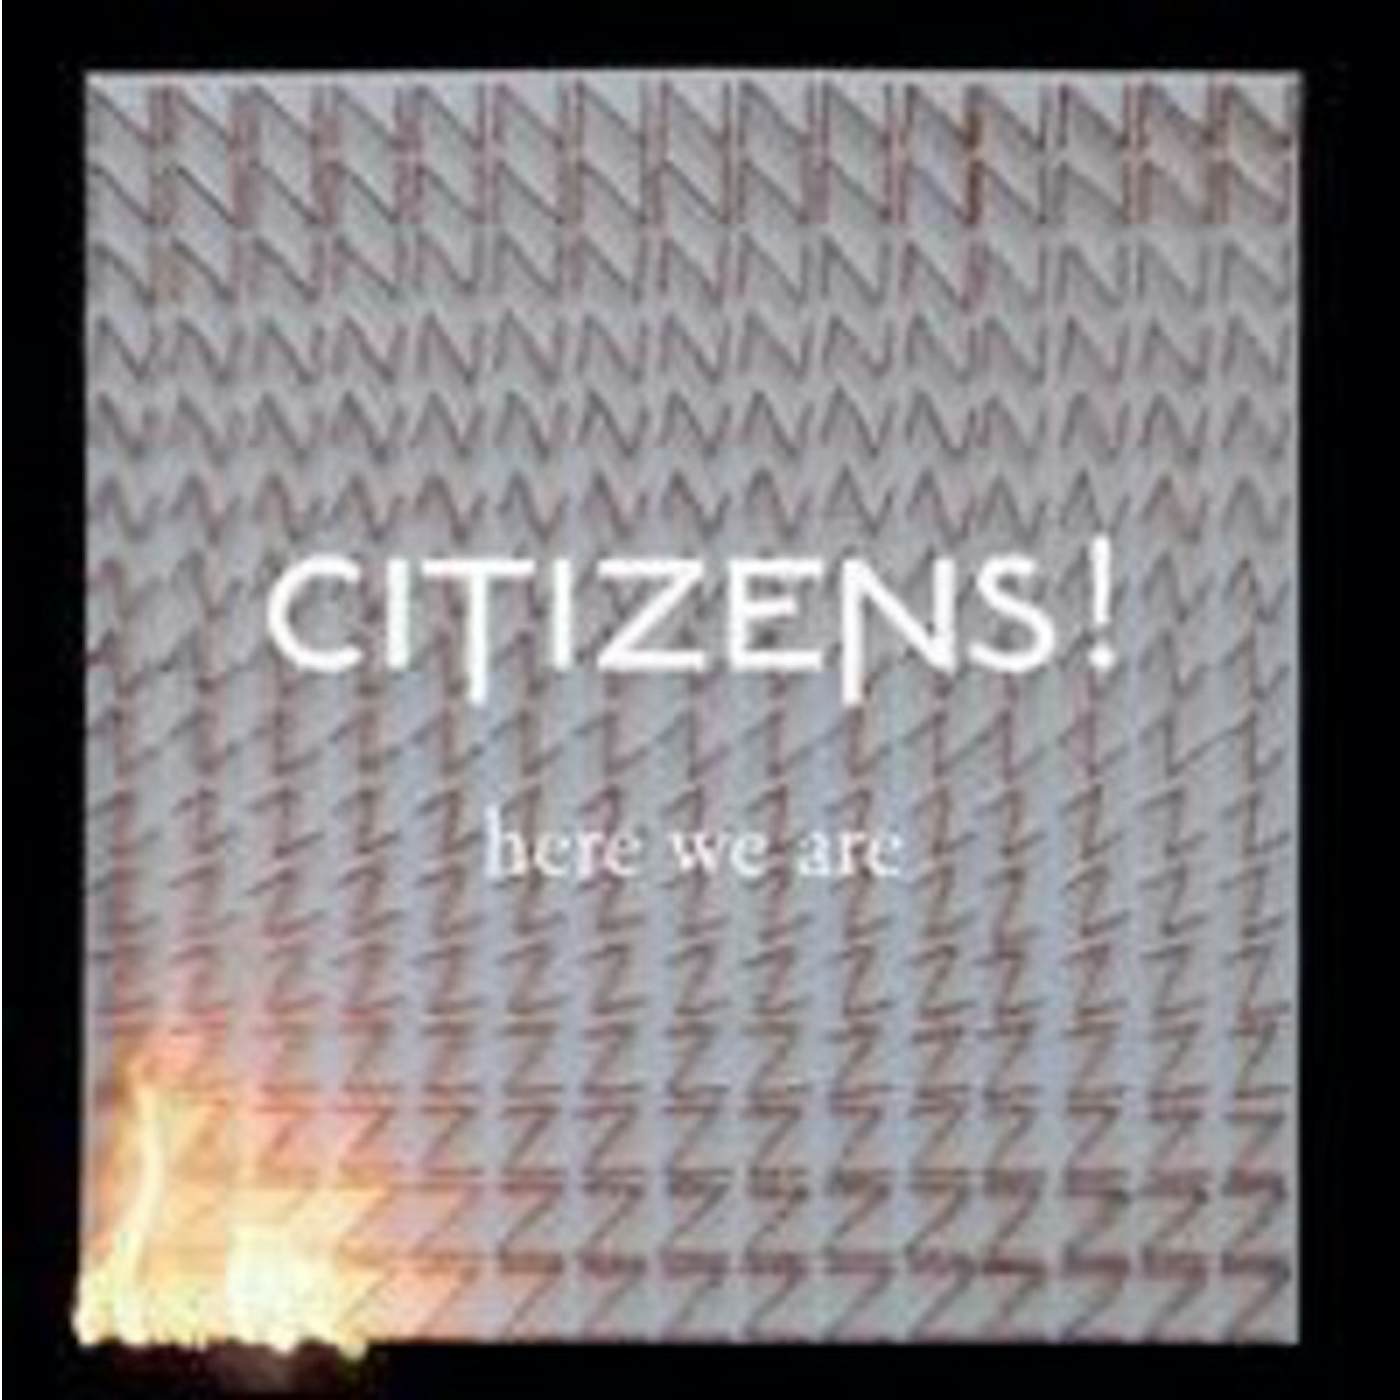 Citizens! Here We Are Vinyl Record